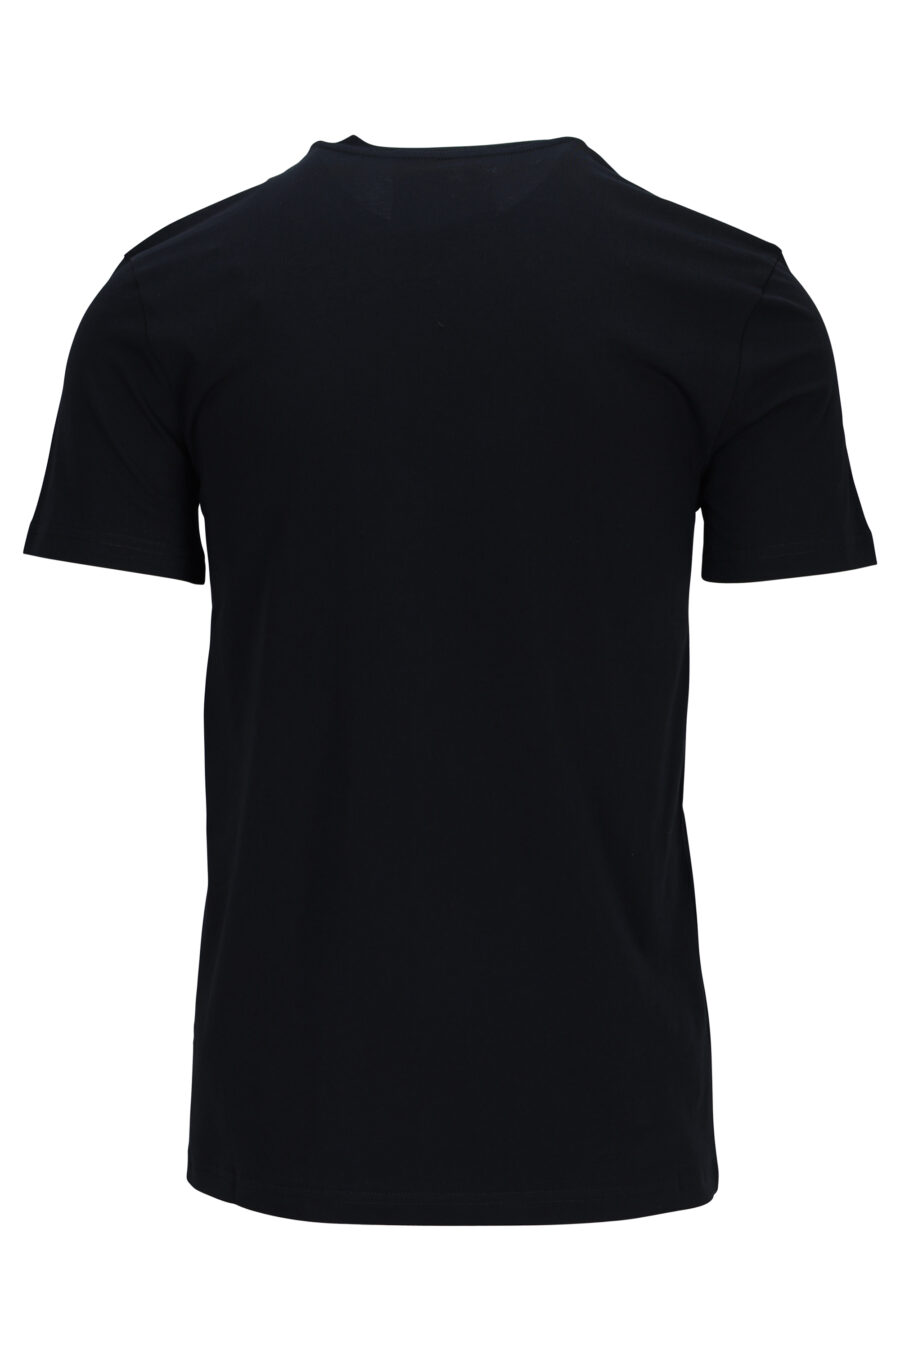 Black T-shirt with maxilogue "couture milano" - 889316936551 1